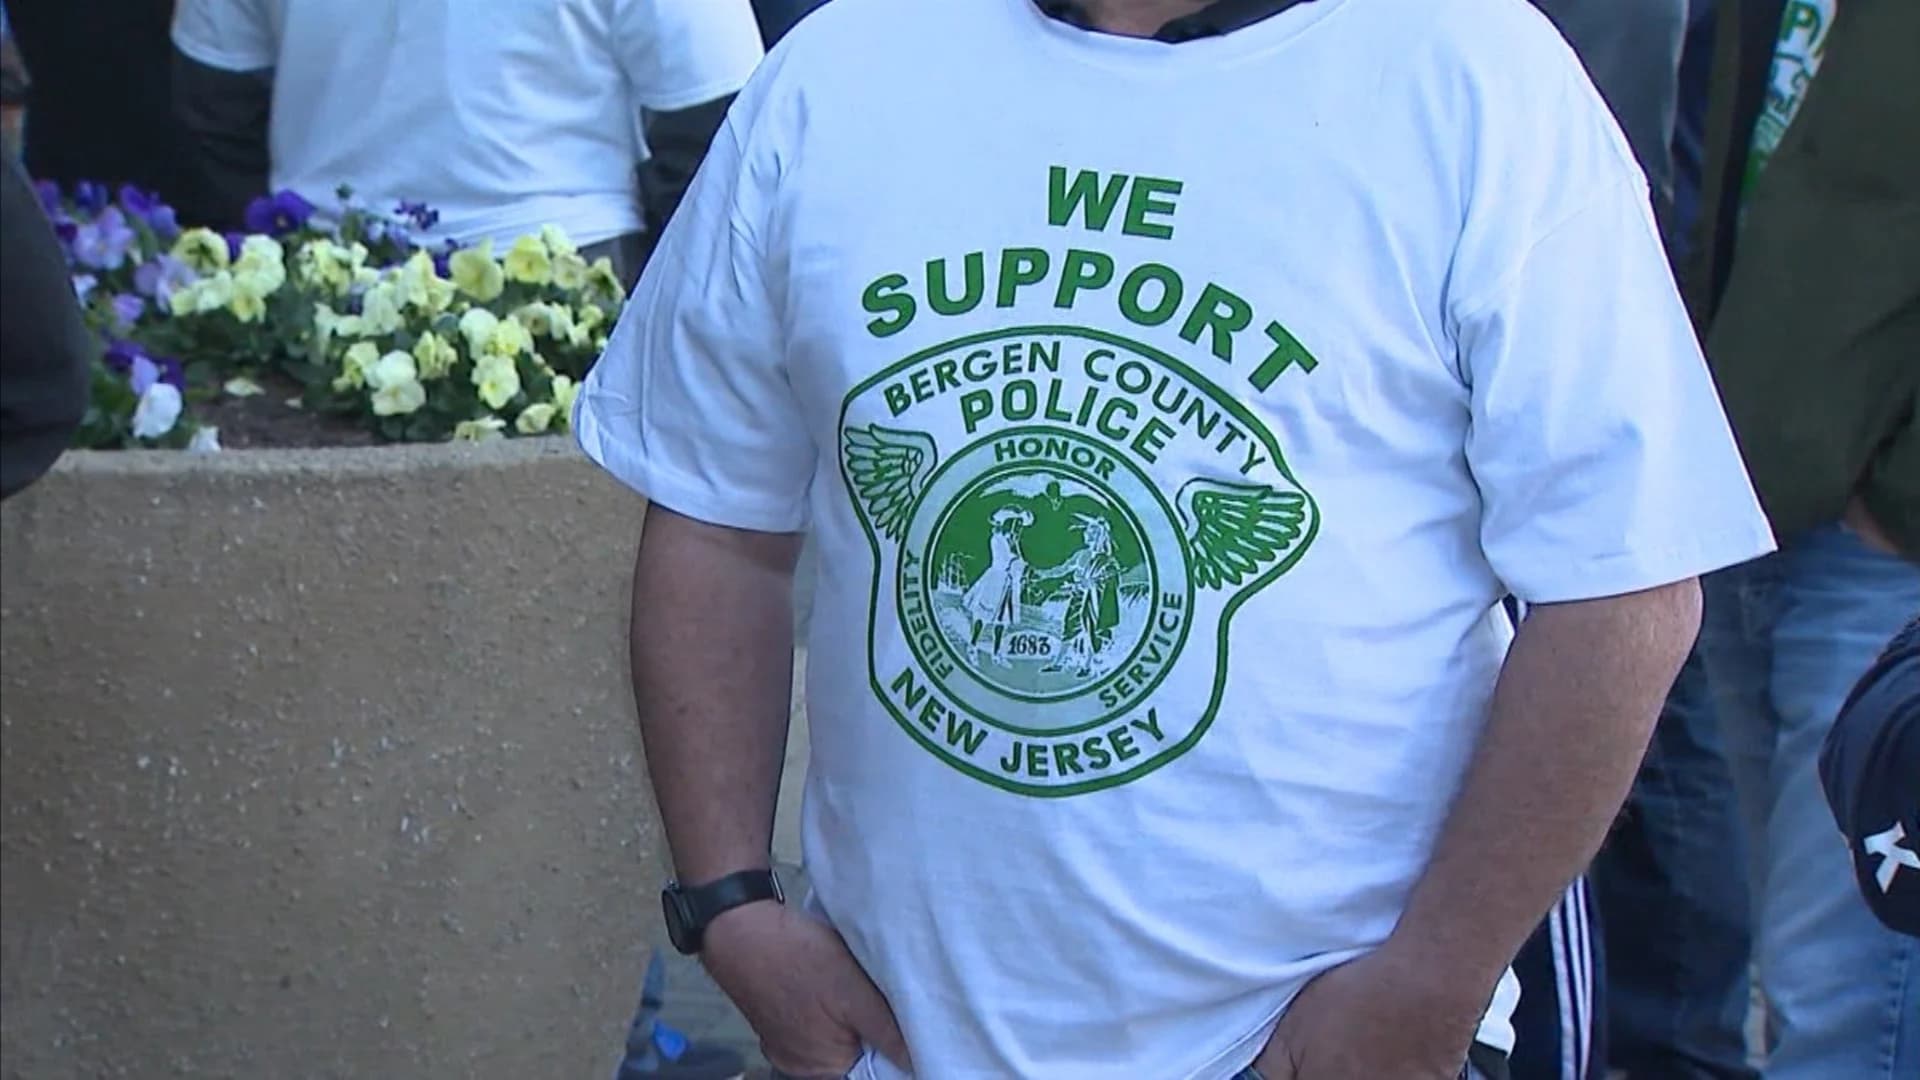 First responders show up in solidarity to oppose possible Bergen County police layoffs